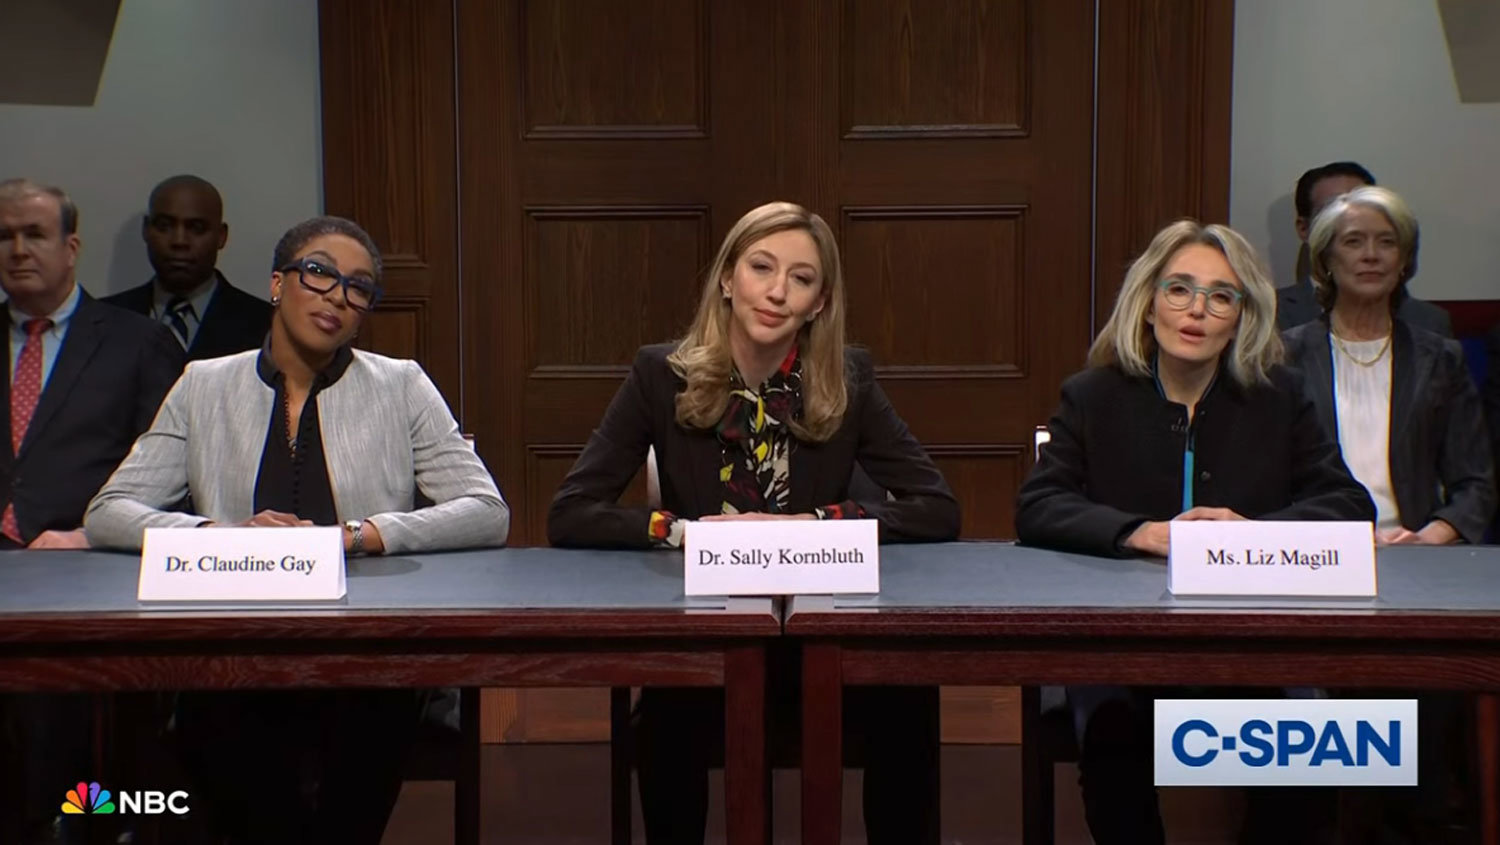 ‘Saturday Night Live' Cold Open Skewers University Presidents For Their Evasive Answers At House